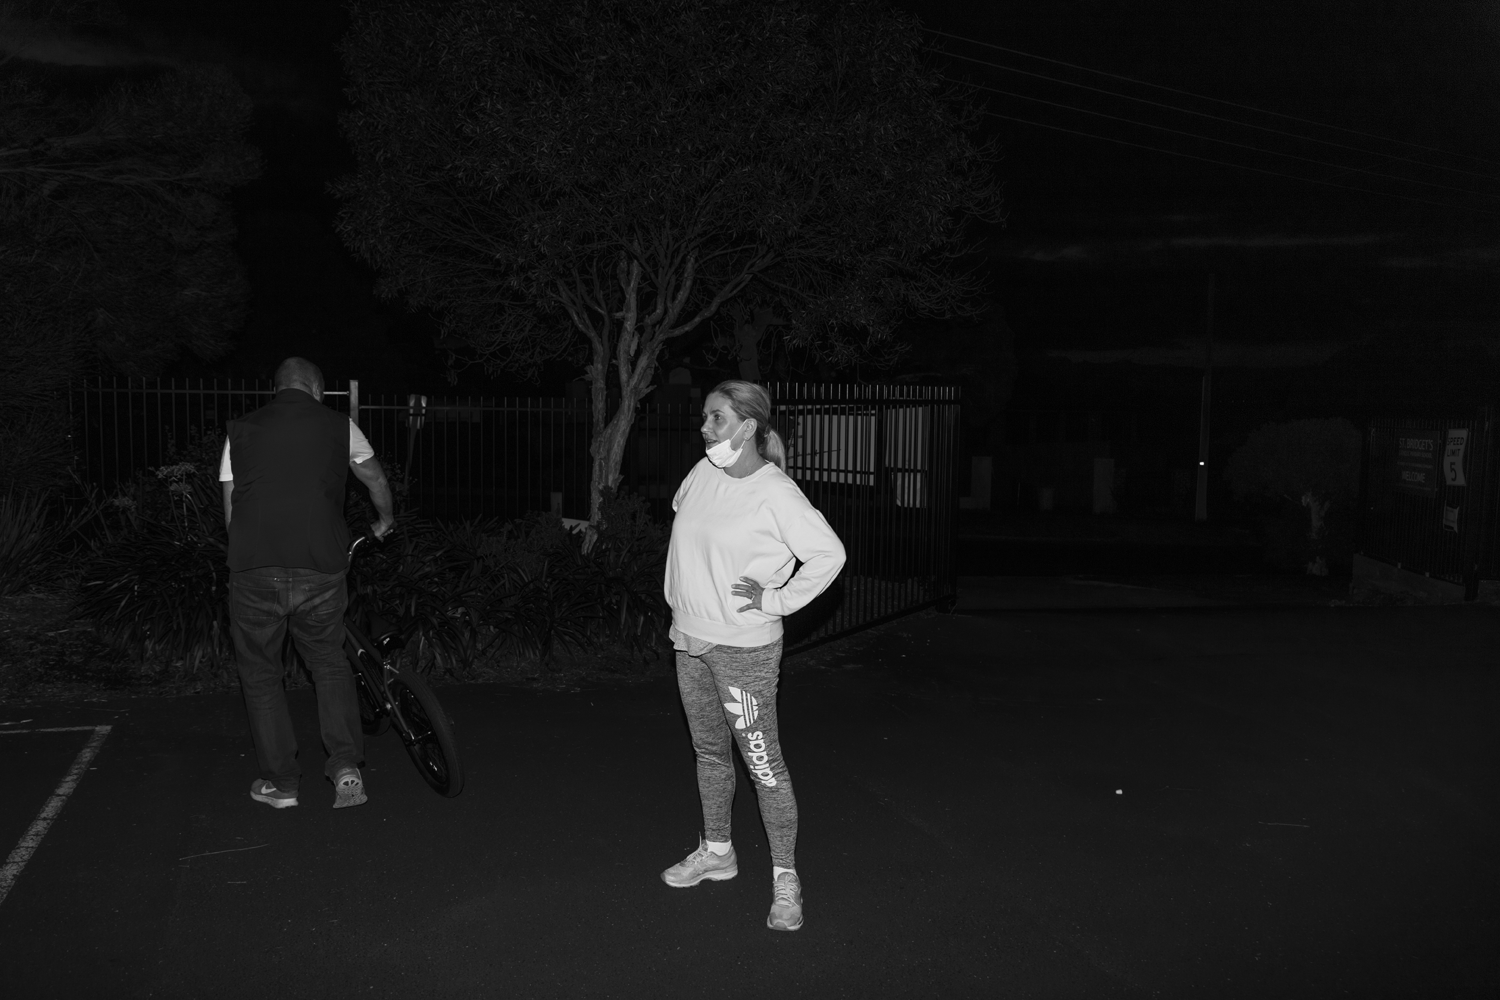 Black and white photograph of candid portrait of a woman wearing a mask alongside a man with bike in a car park at night.